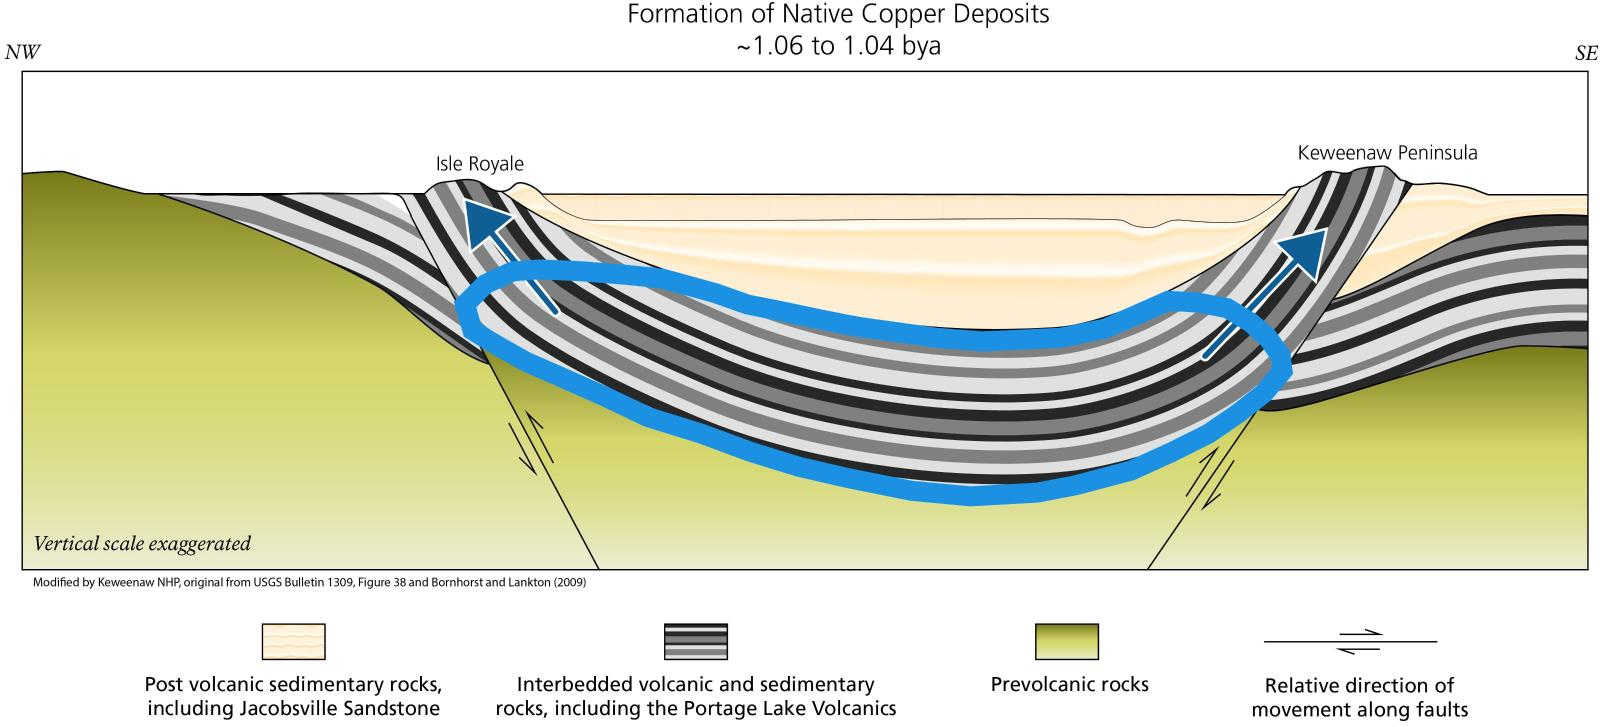 Cross sectional illustration showing rock types. Volcanic and sedimentary rocks form a bowl shape, with Isle Royale and the Keweenaw being opposite rims. Blue outlines the bottom part of the bowl. Blue arrows point towards the rims of the bowl.